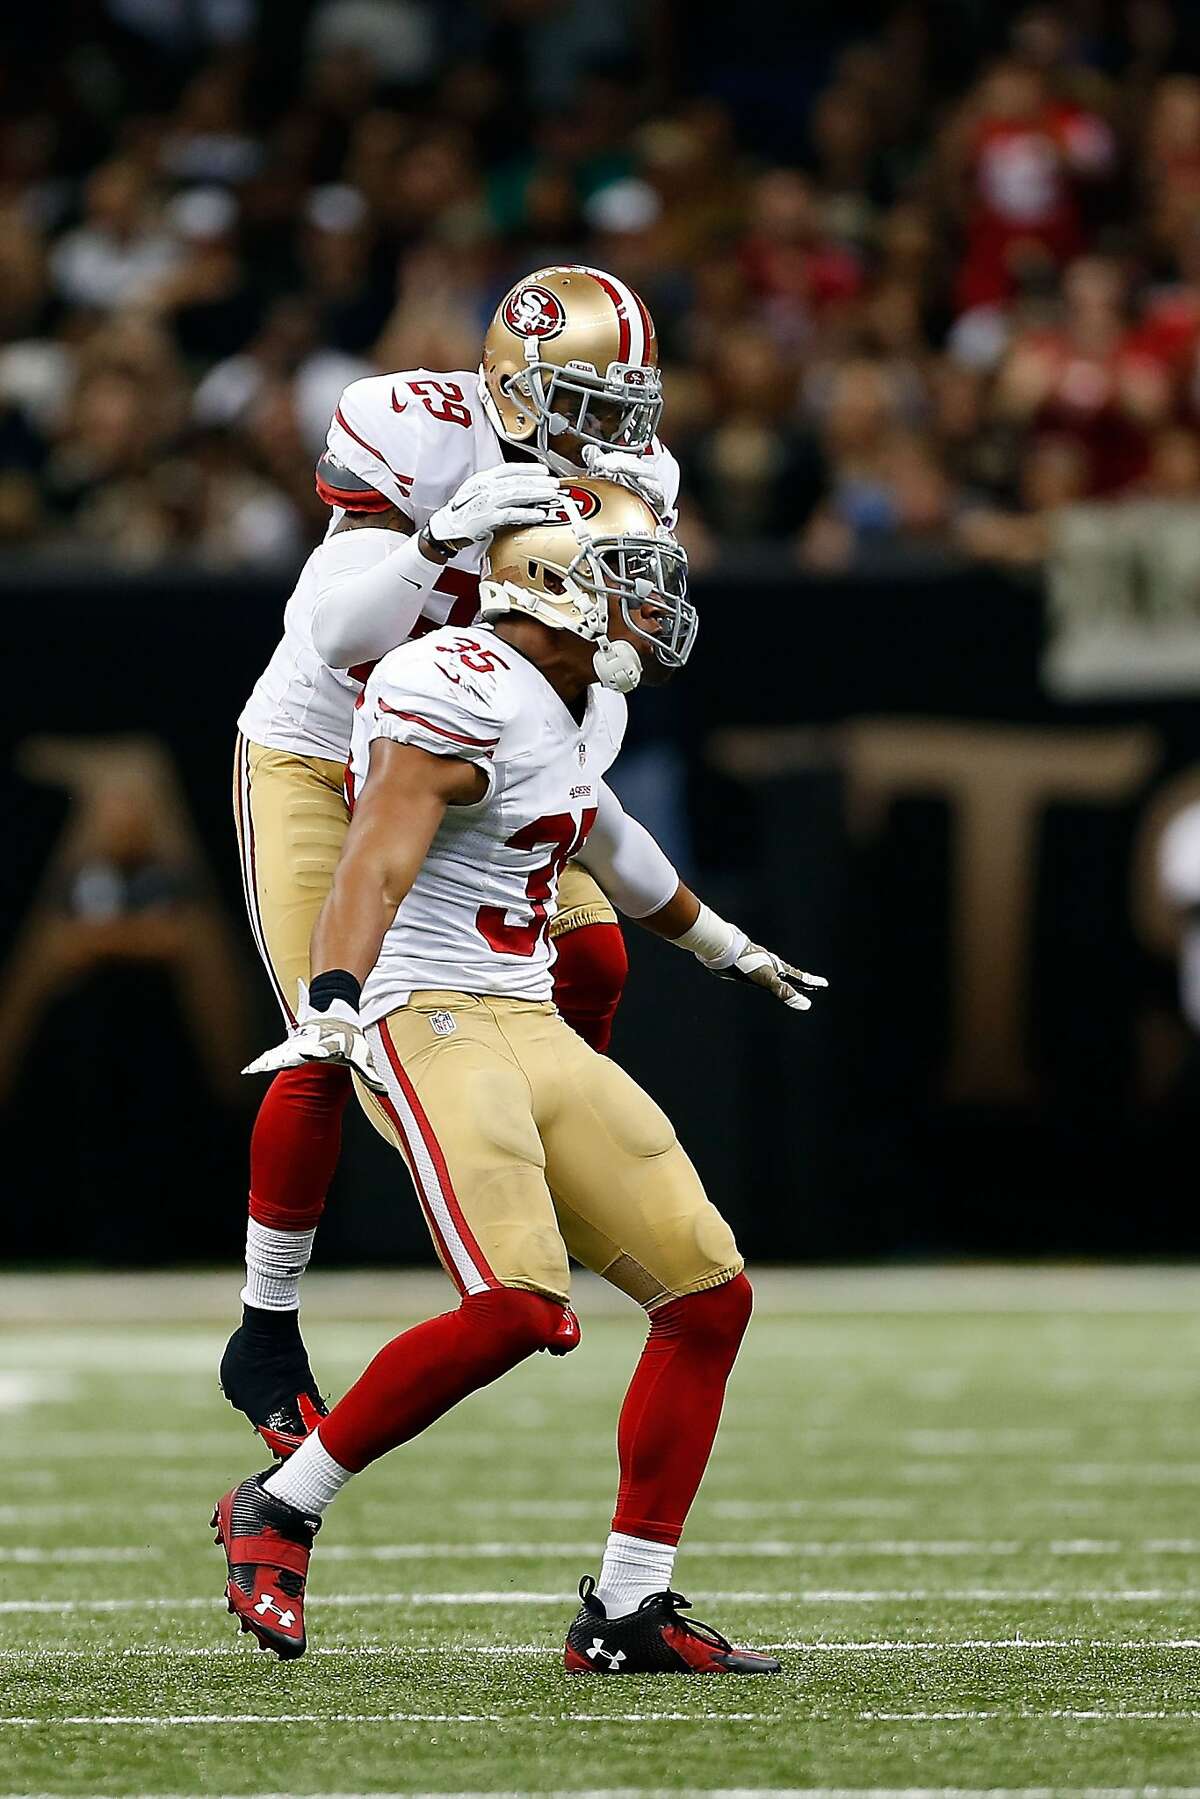 NEW ORLEANS, LA - NOVEMBER 09: Eric Reid #35 of the San Francisco 49ers is conratulated by Chris Culliver #29 following a defensive stop during the fourth quarter of a game against the New Orleans Saints at the Mercedes-Benz Superdome on November 9, 2014 in New Orleans, Louisiana. (Photo by Wesley Hitt/Getty Images)